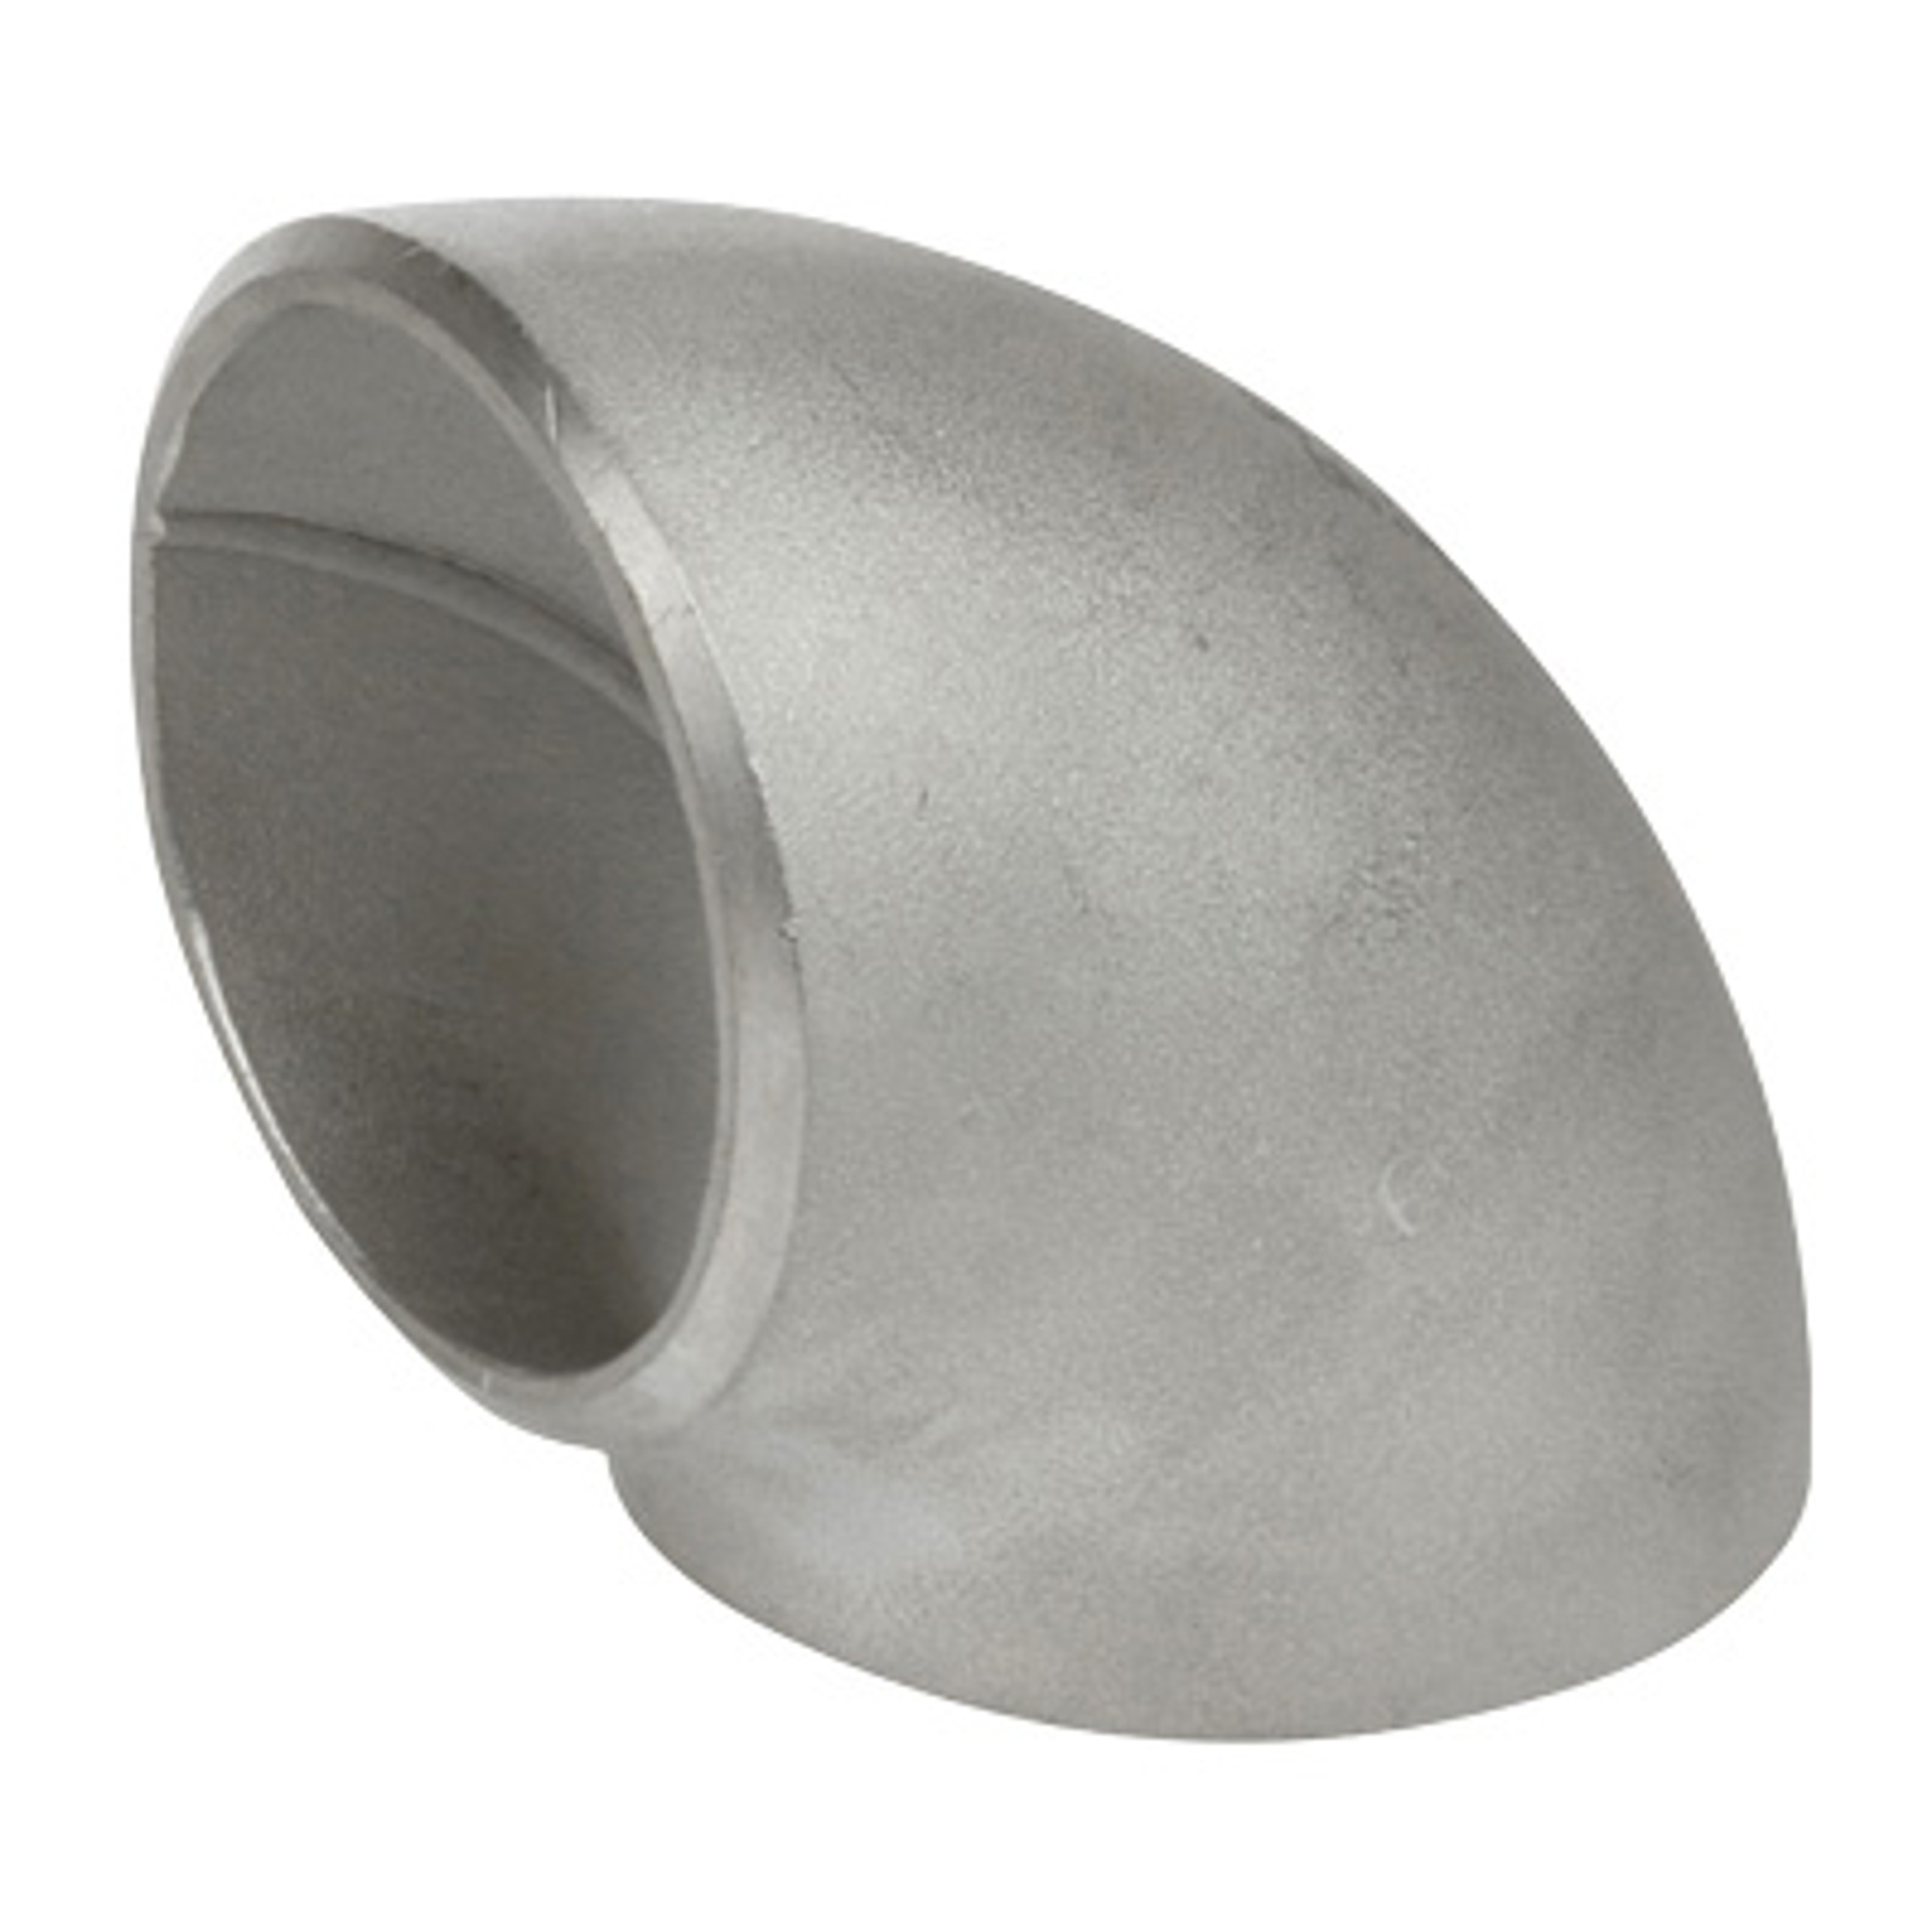 Stainless Steel Butt Weld Pipe Fittings 90° Elbow Lr 4 Sch 40